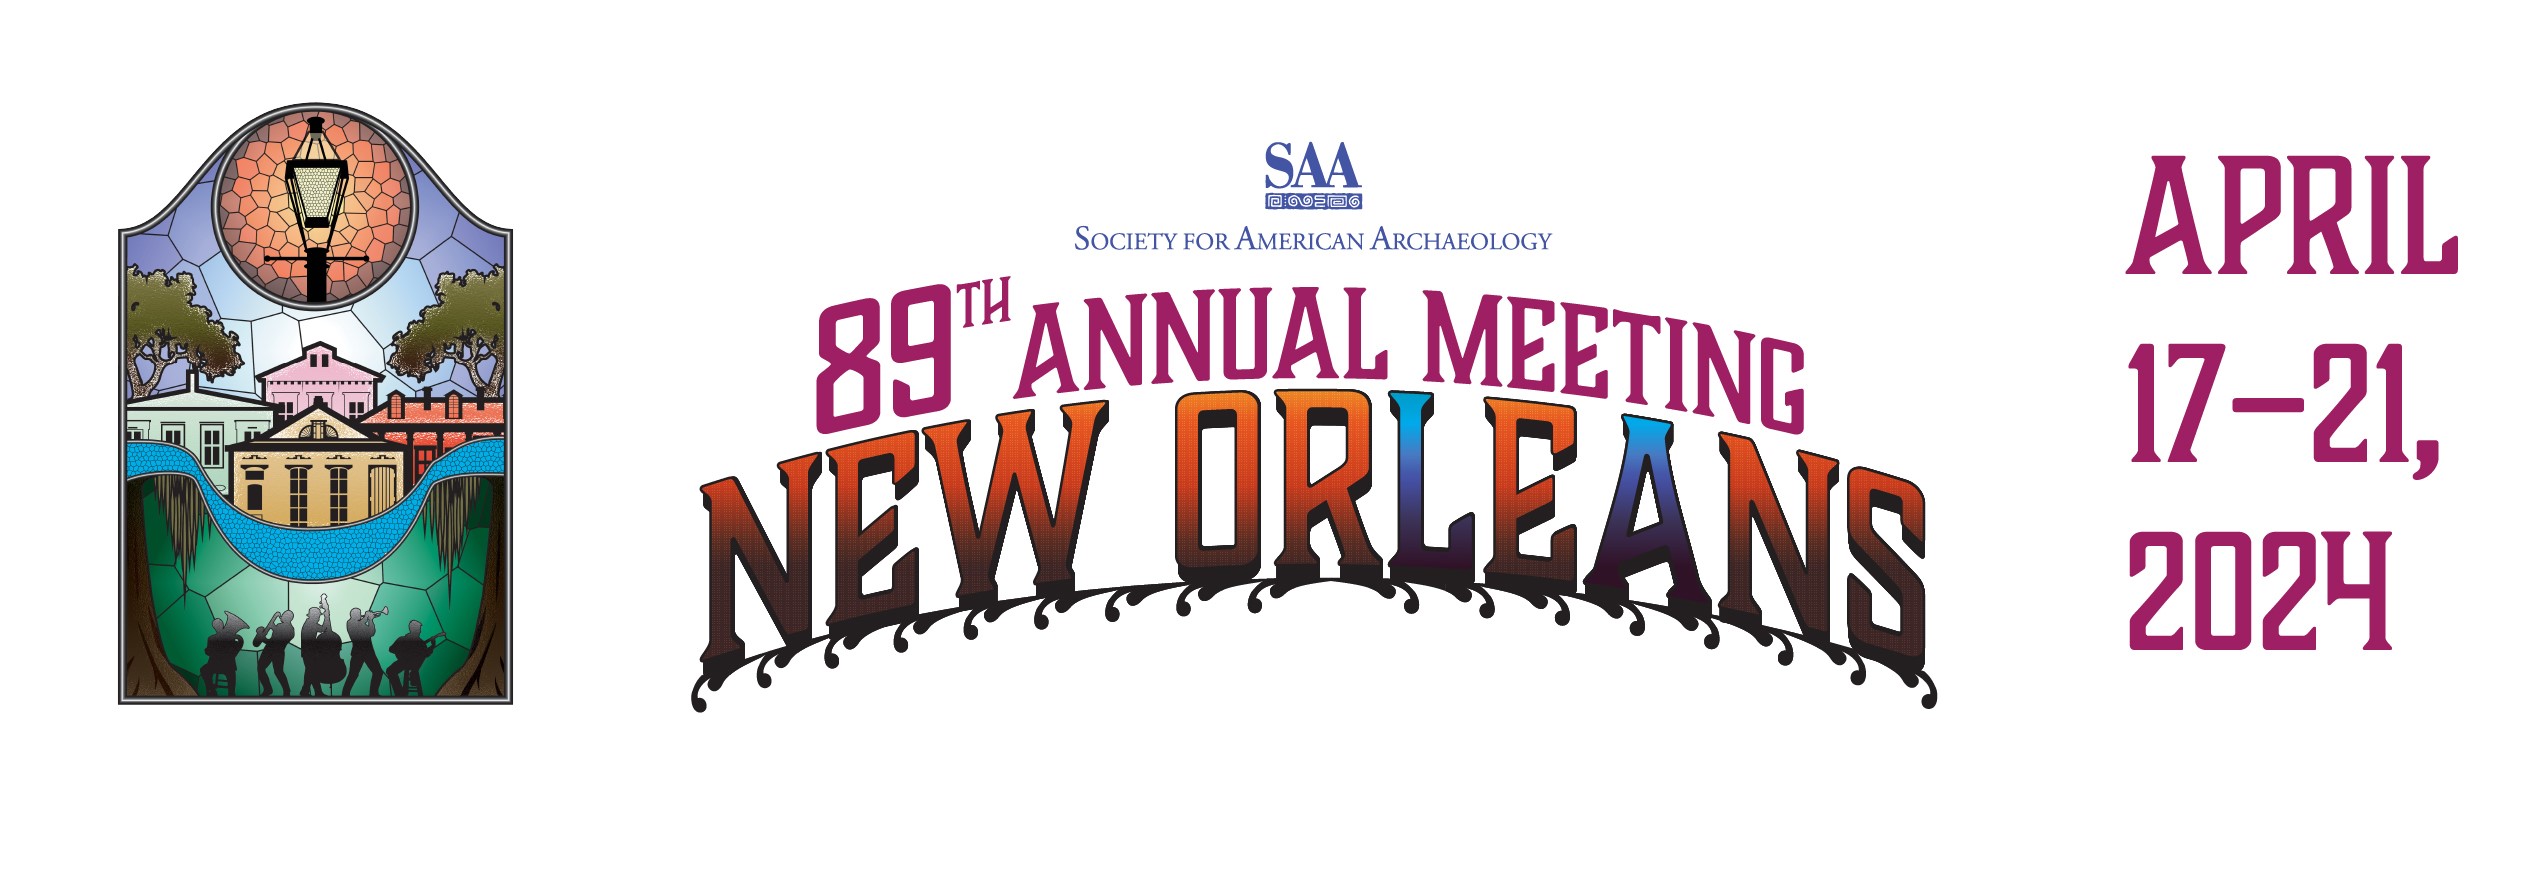 Banner for the SAA conference with the words "89th annual meeting new orleans) between a stained-glass style image of houses in new orleans and the dates "April 17-21, 2024"